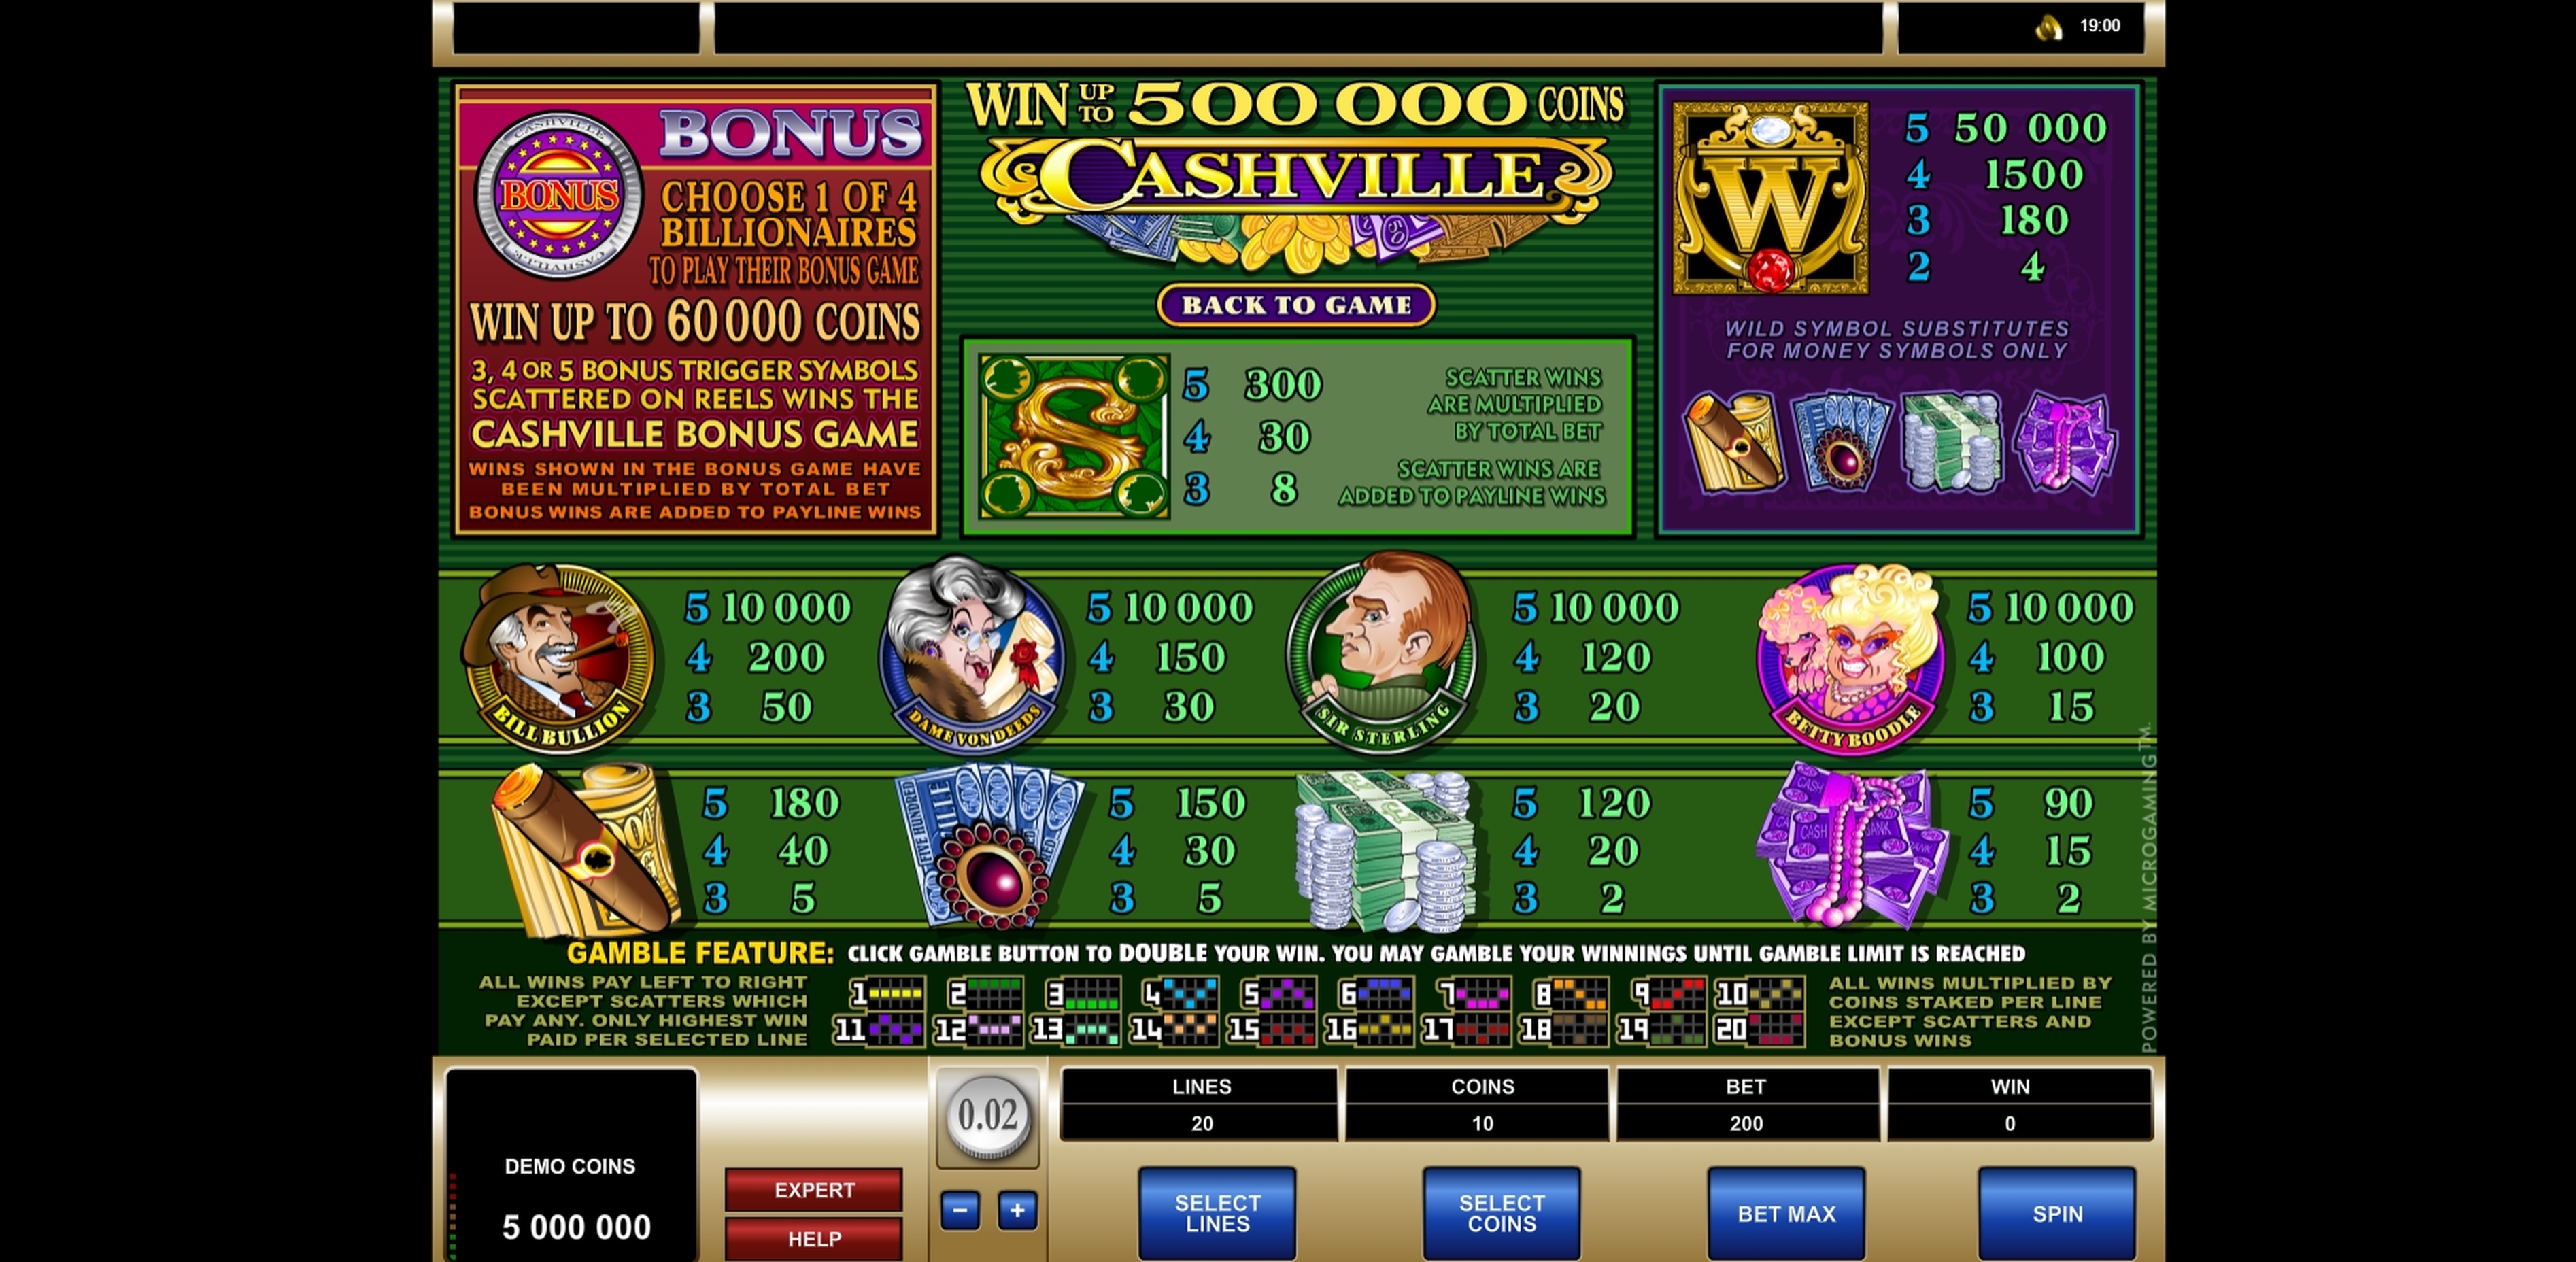 Info of Cashville Slot Game by Microgaming